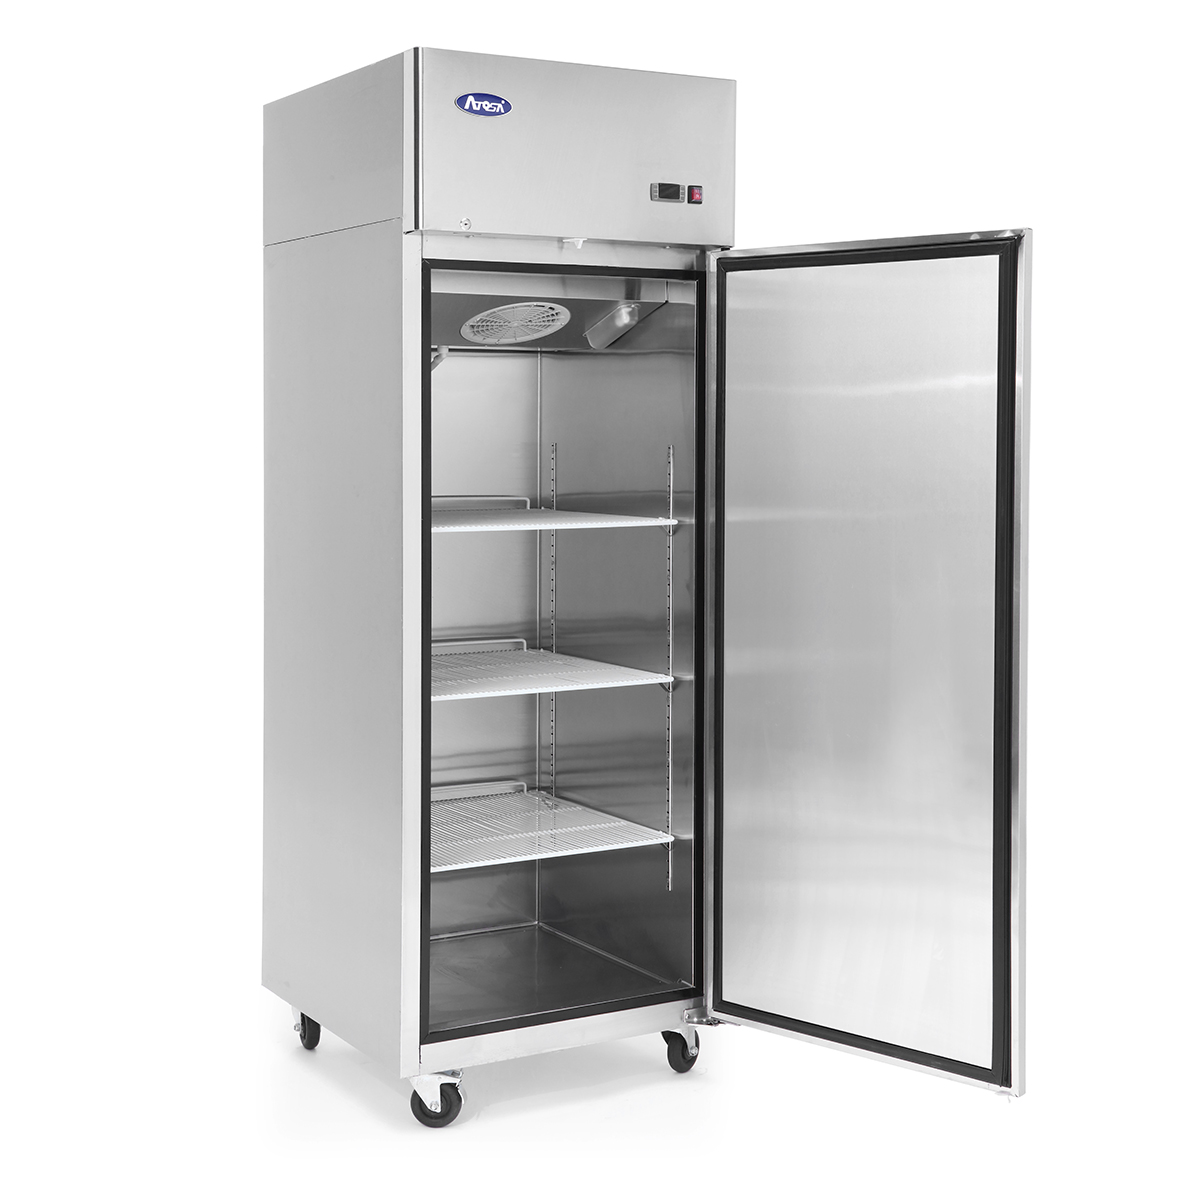 Atosa MBF8001GR Reach-In Top Mount Freezer 28-7/8"W x 31-1/2"D x 82-7/8"H with Locking Solid Door image 1